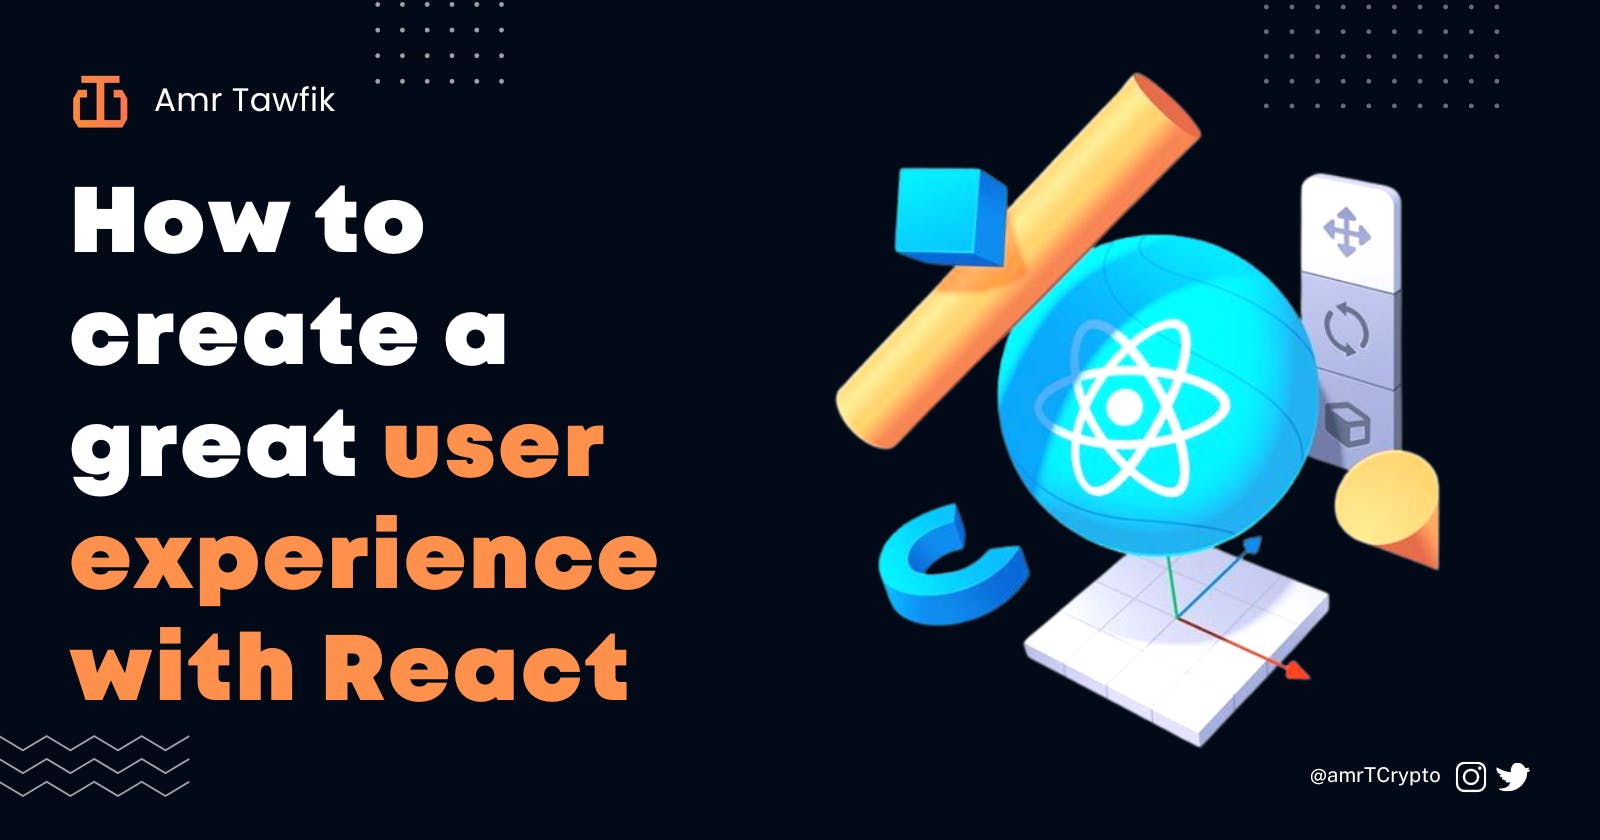 How to create a great user experience with React